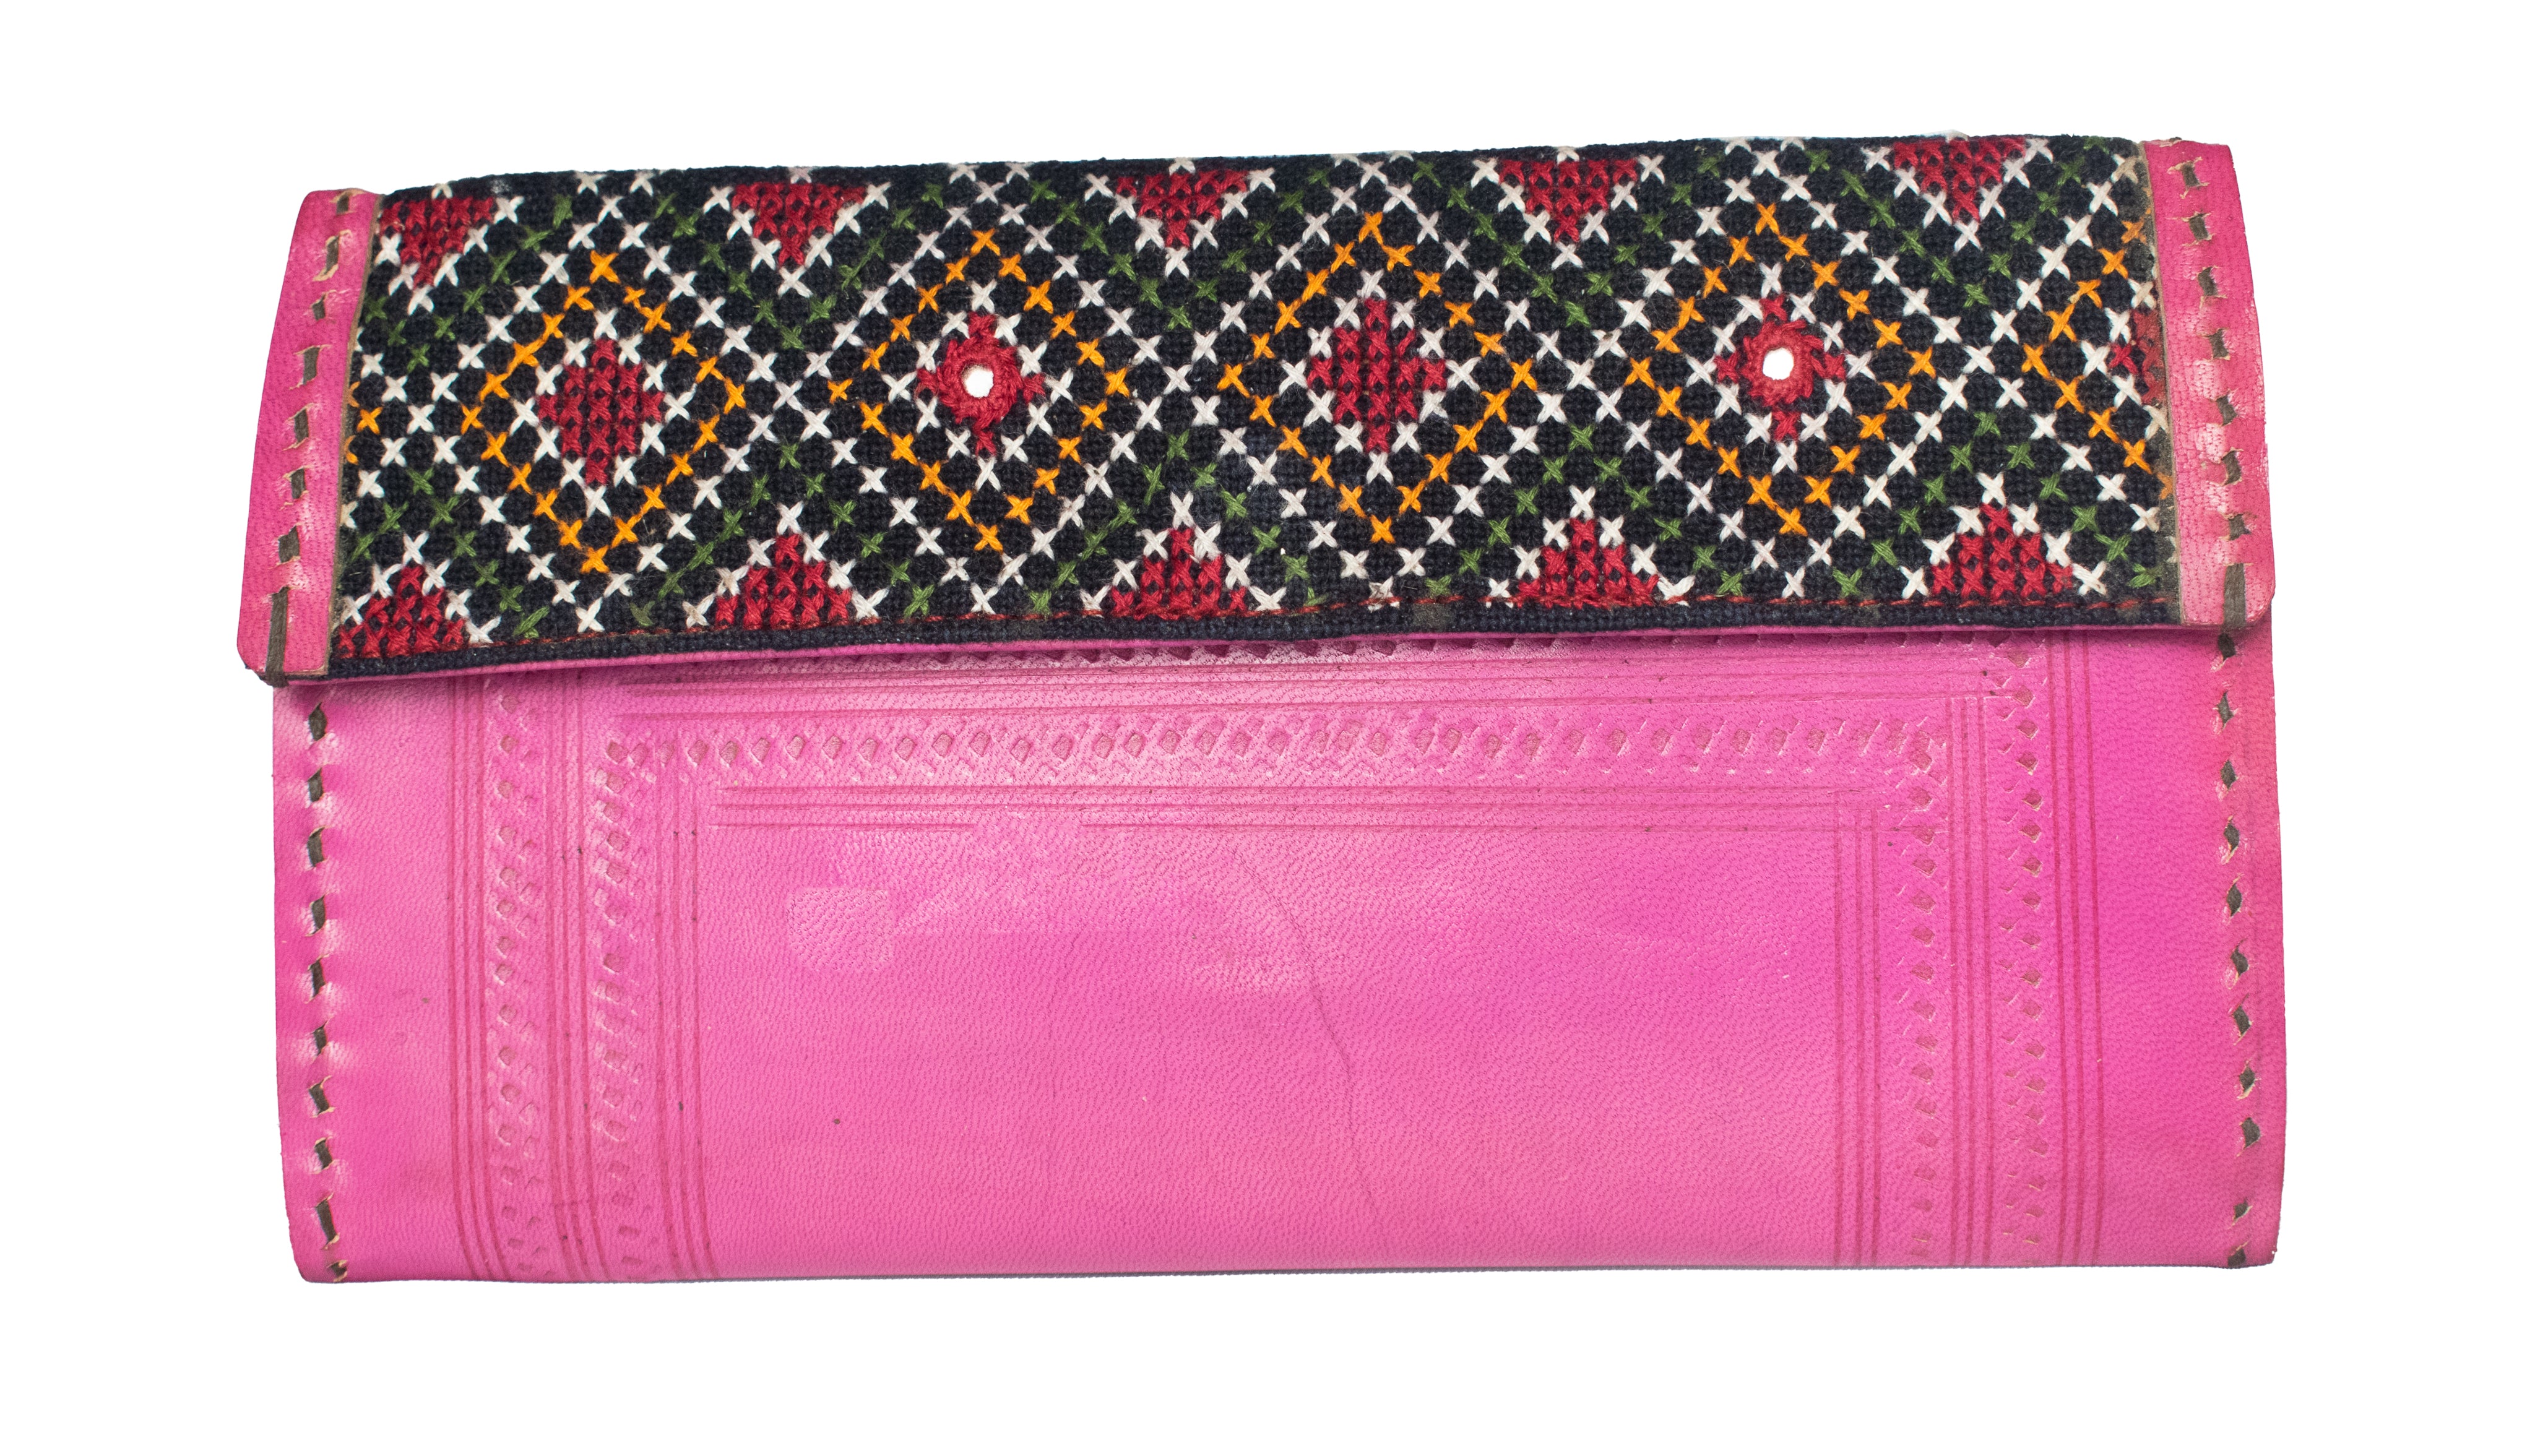 Wallets for Women - Try This 25 Latest Collection for Stylish Look | Wallets  for women, Wallet fashion, Leather wallet design